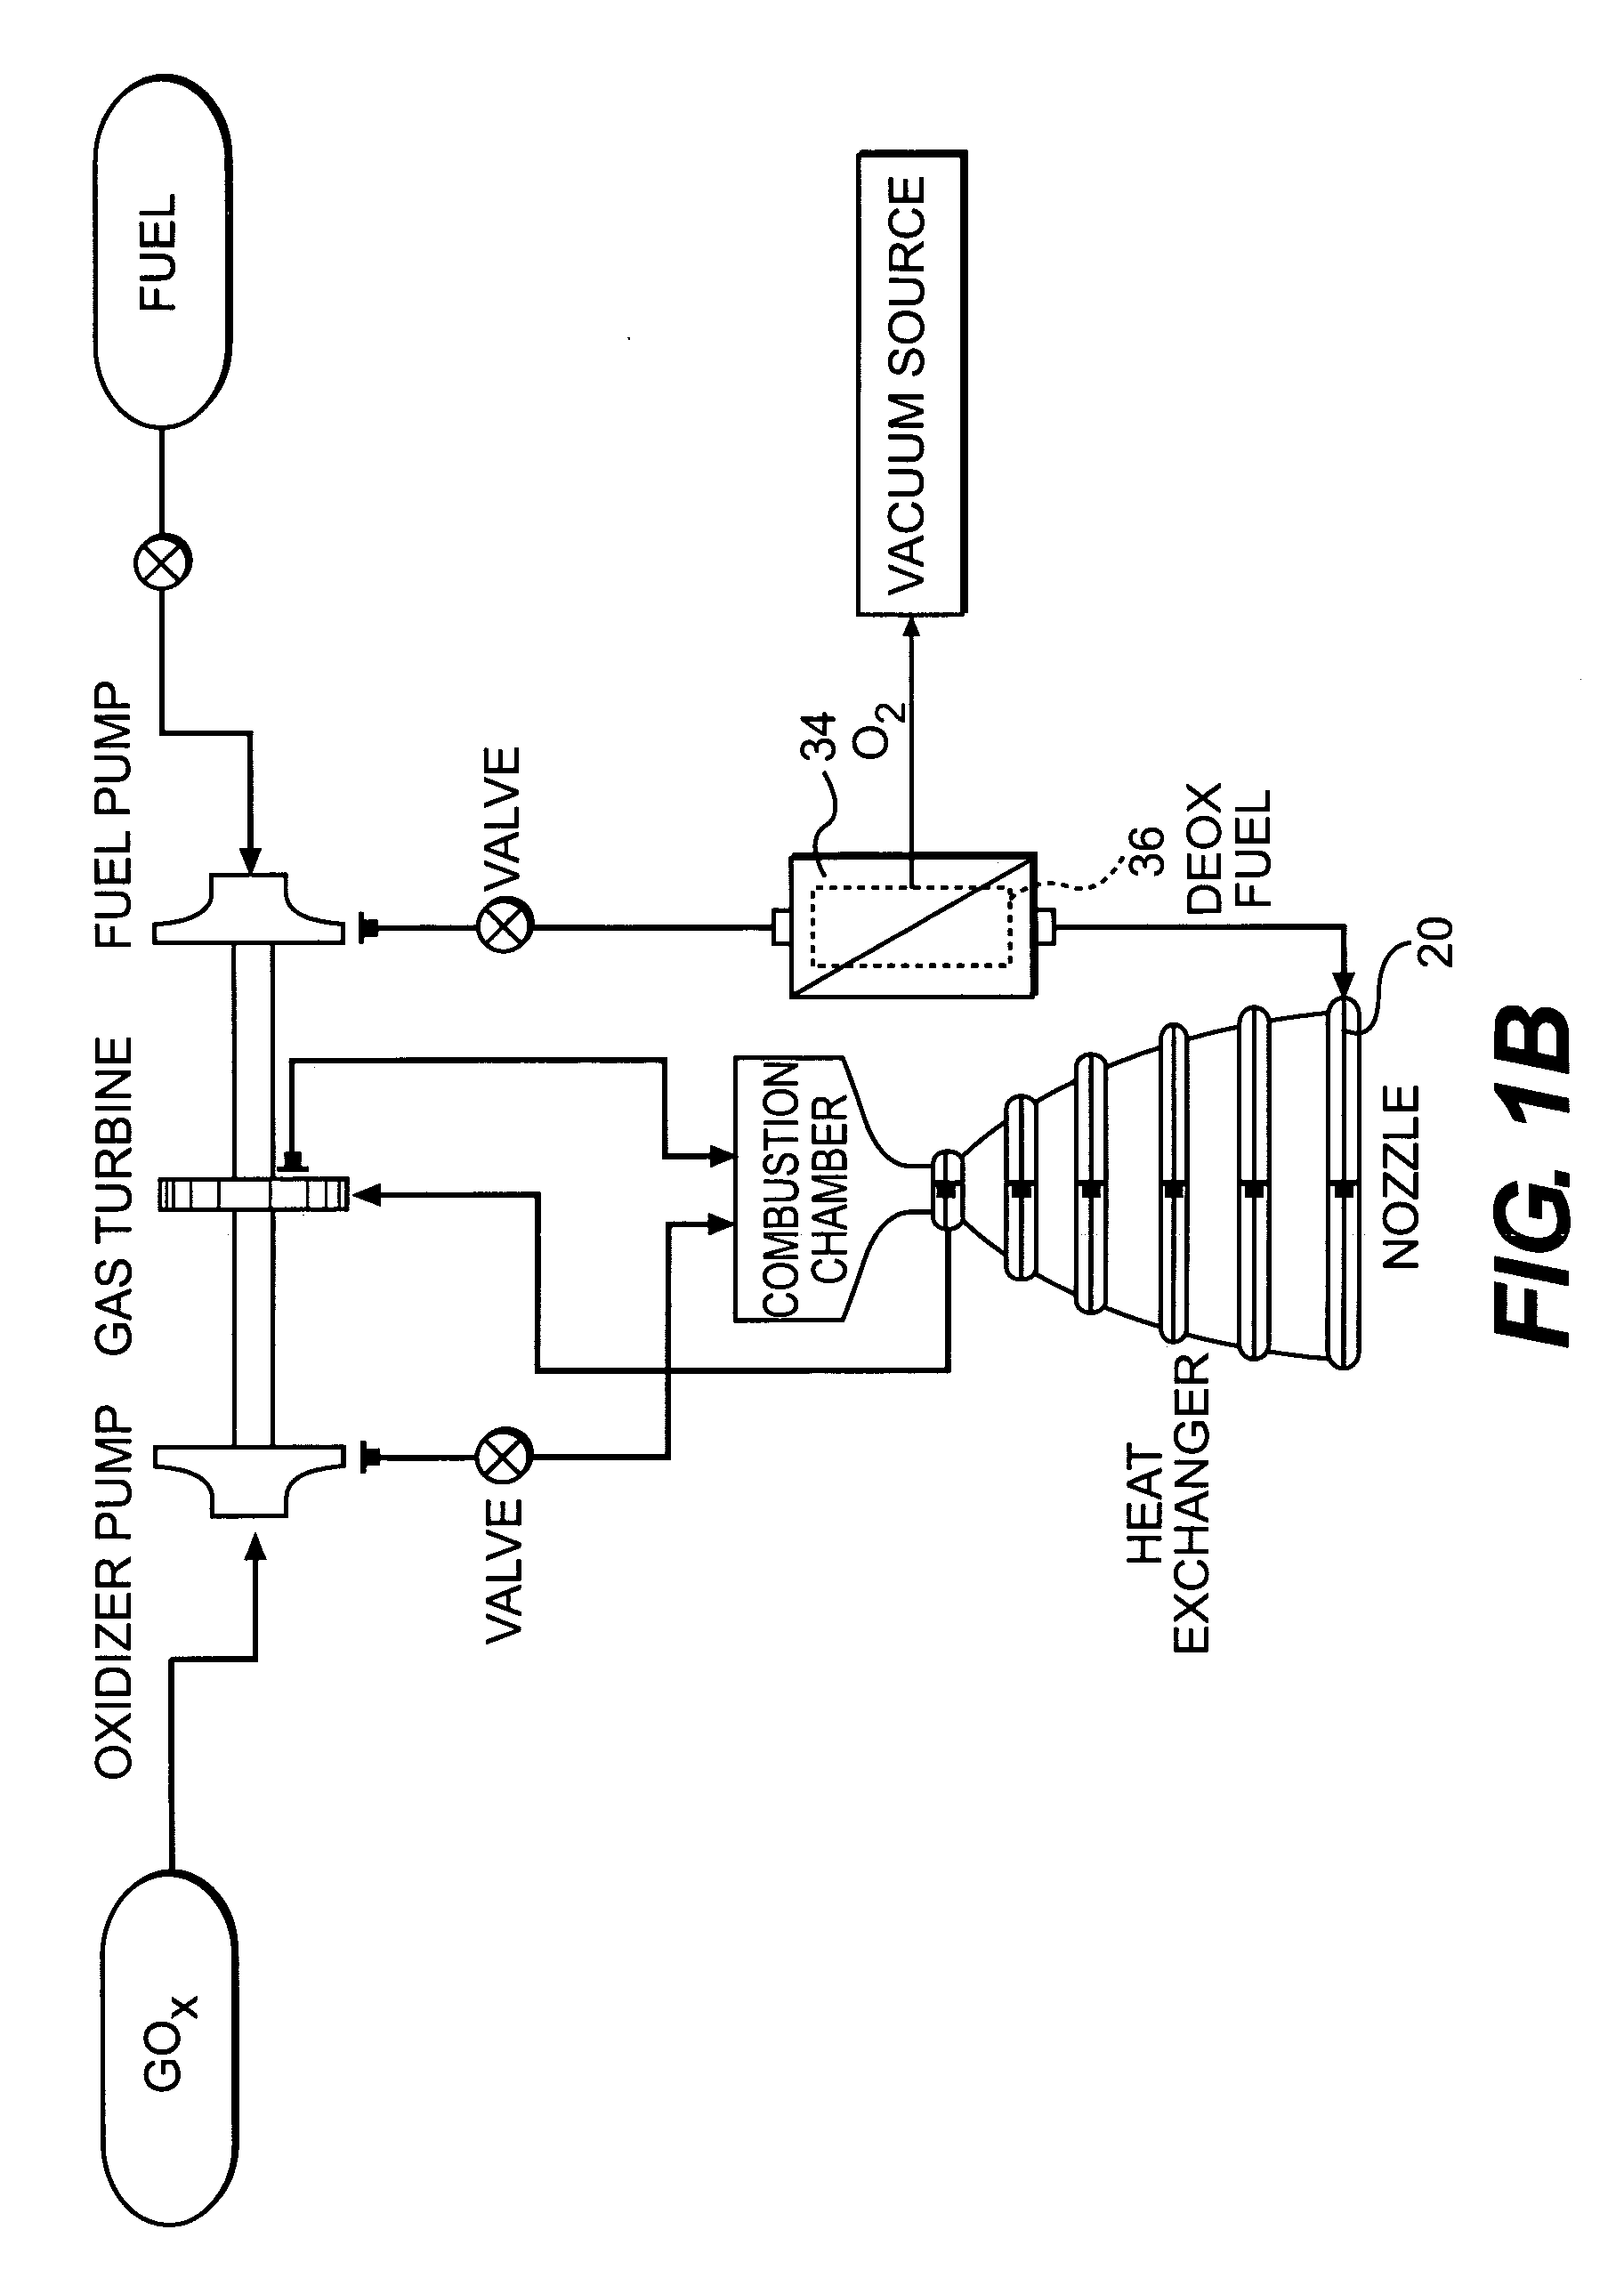 System and method for cooling hydrocarbon-fueled rocket engines